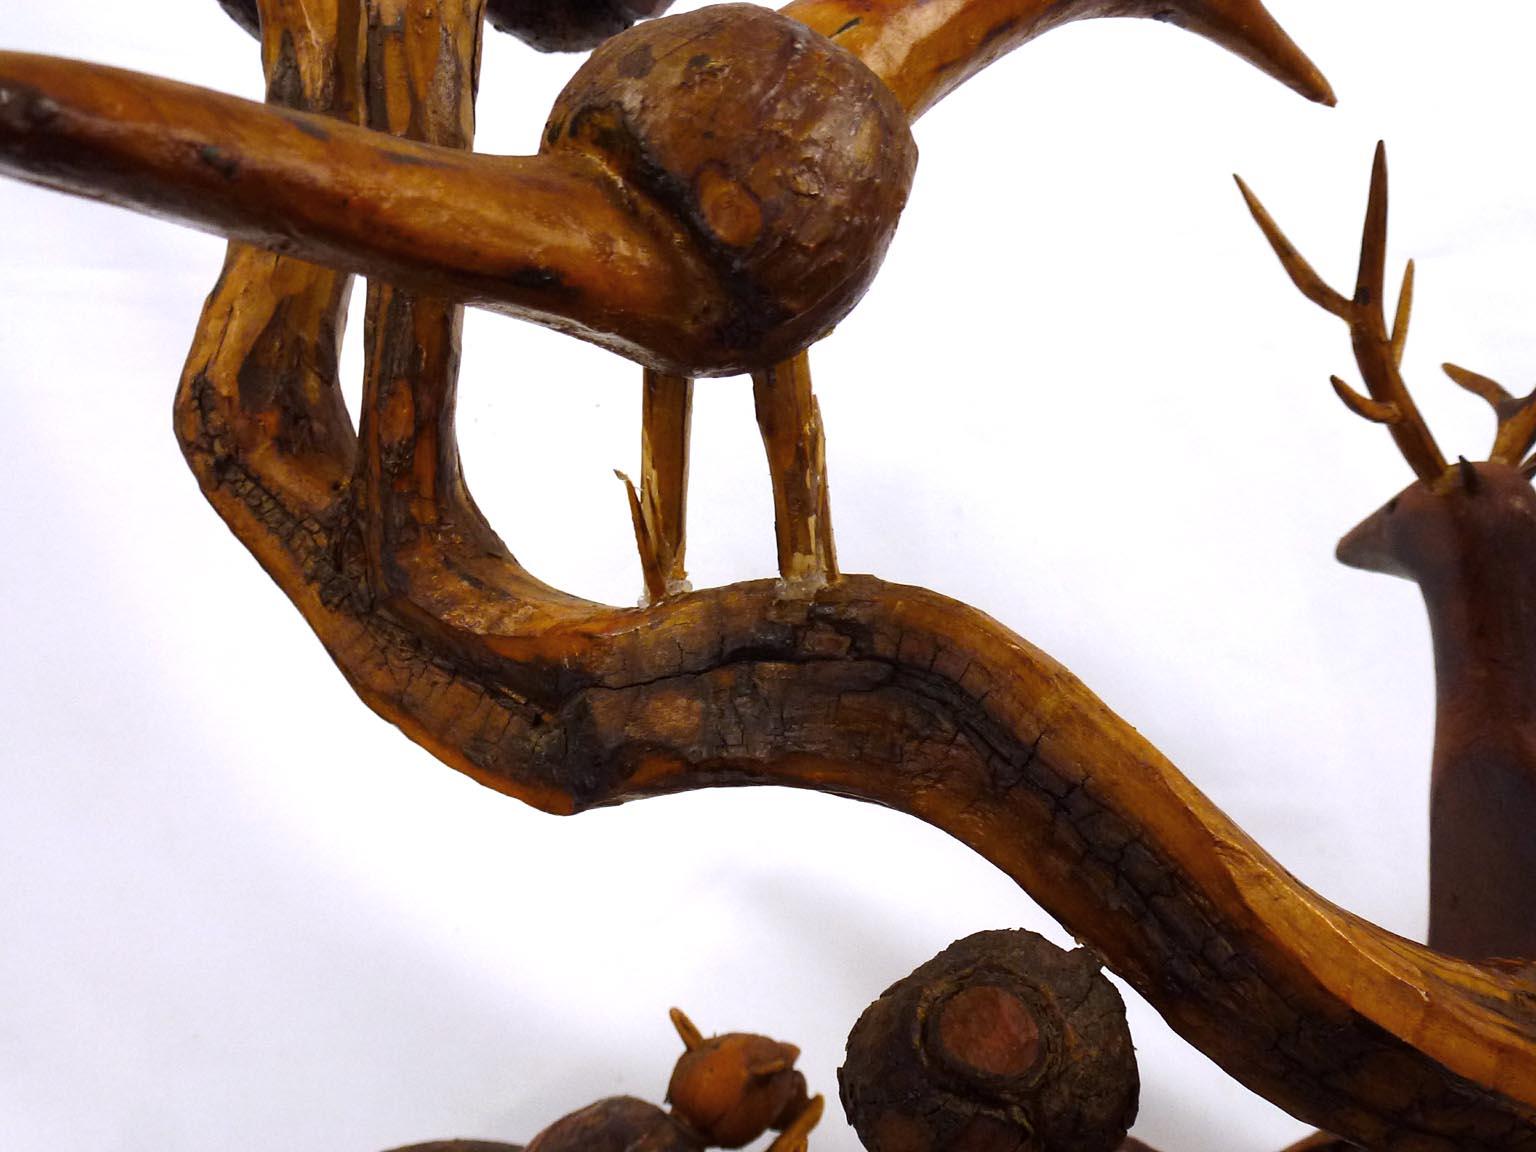 Assemblage of Carved Birds and Animals by the Outsider Artist Russell Gillespie 6